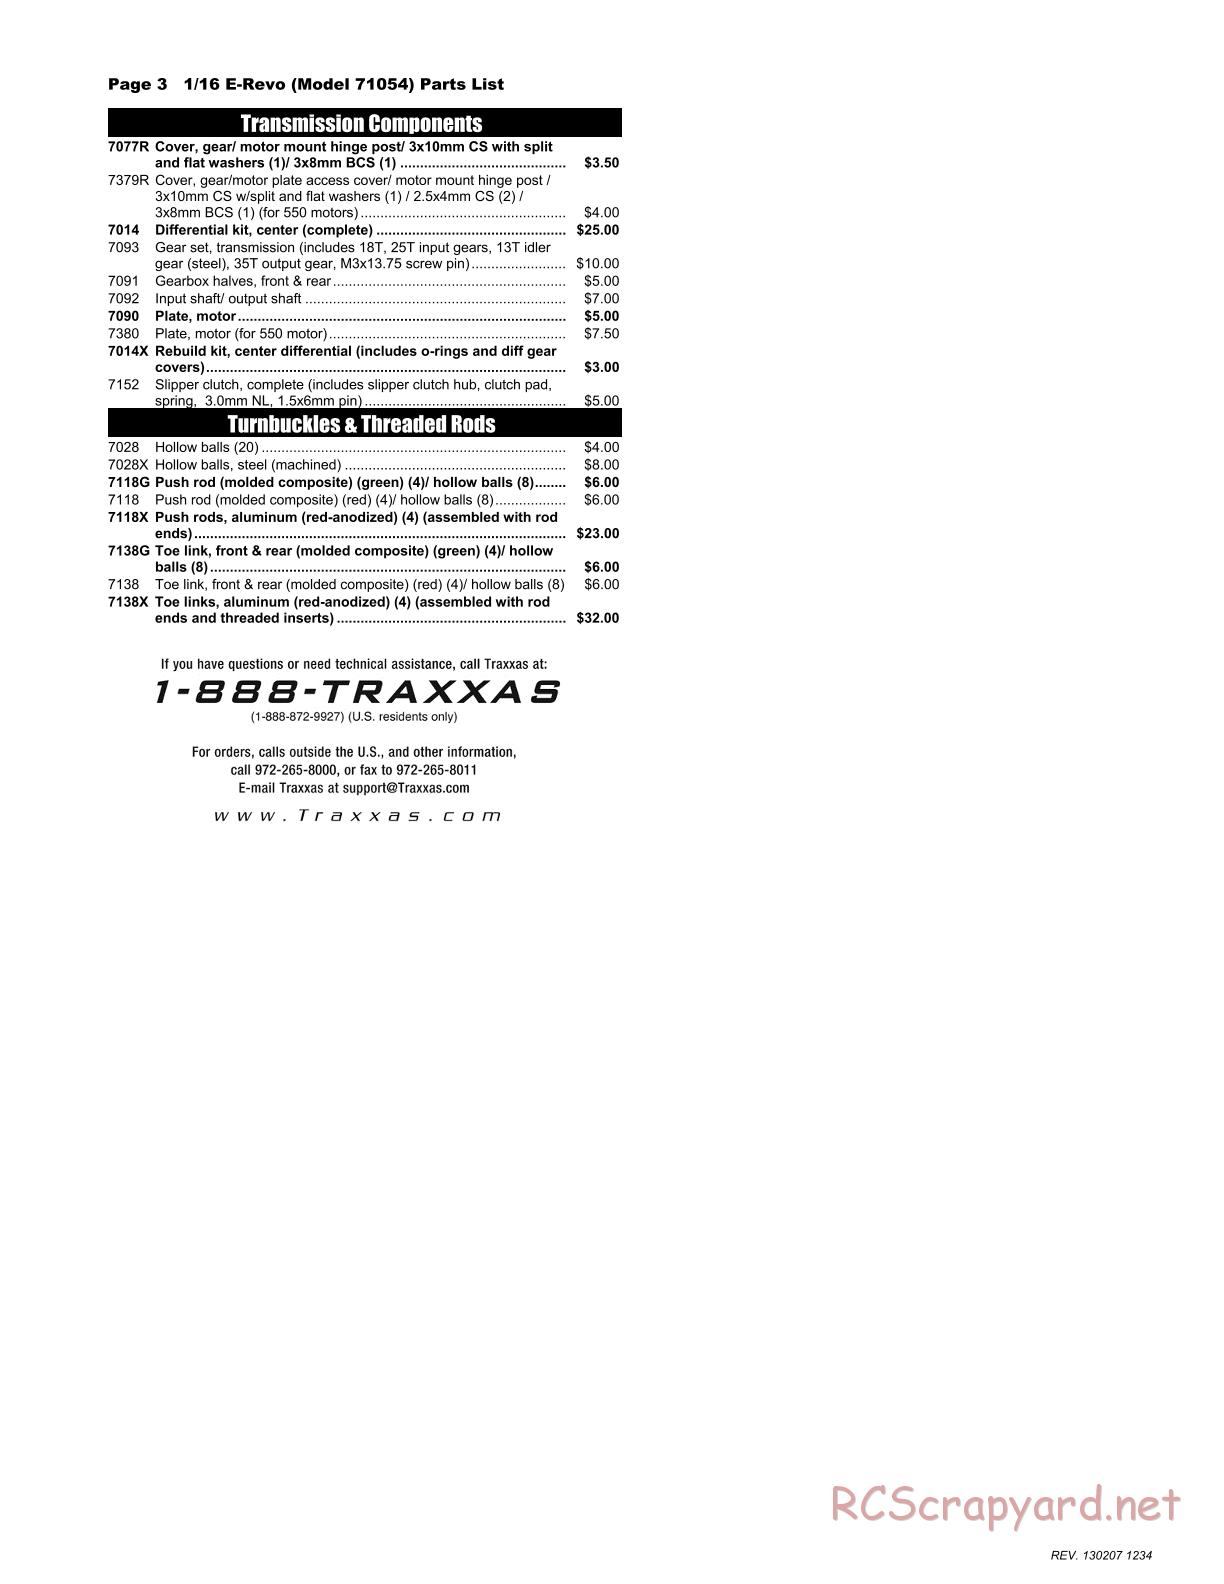 Traxxas - 1/16 E-Revo Brushed (2013) - Parts List - Page 3